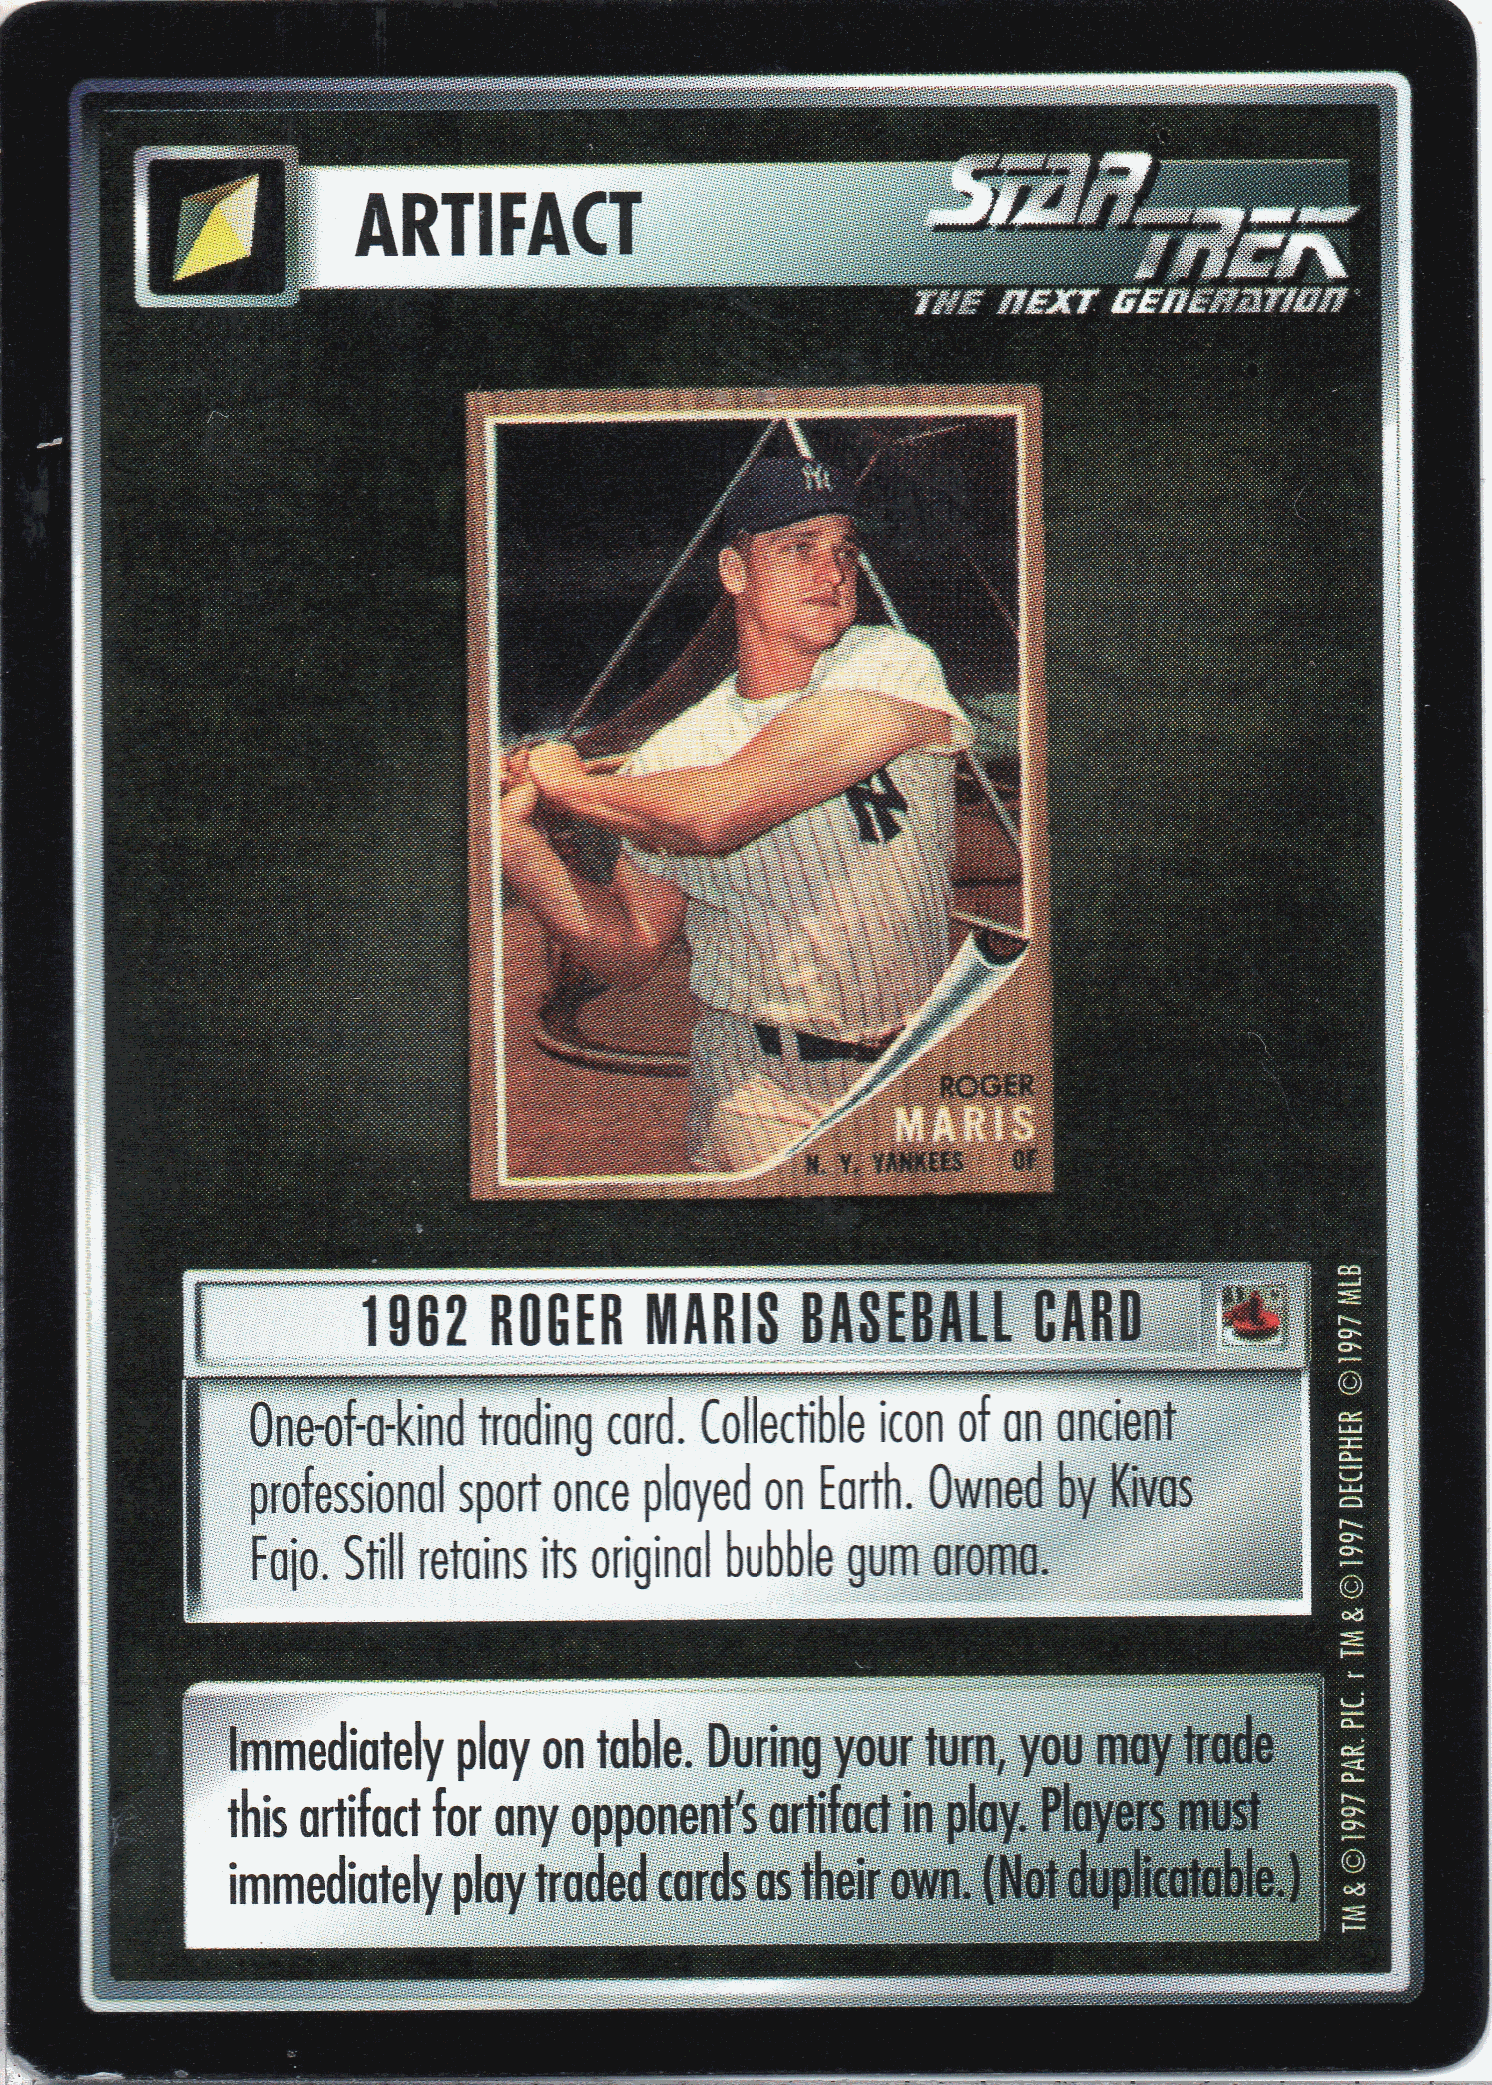 Roger Maris - Baseball by The Letters